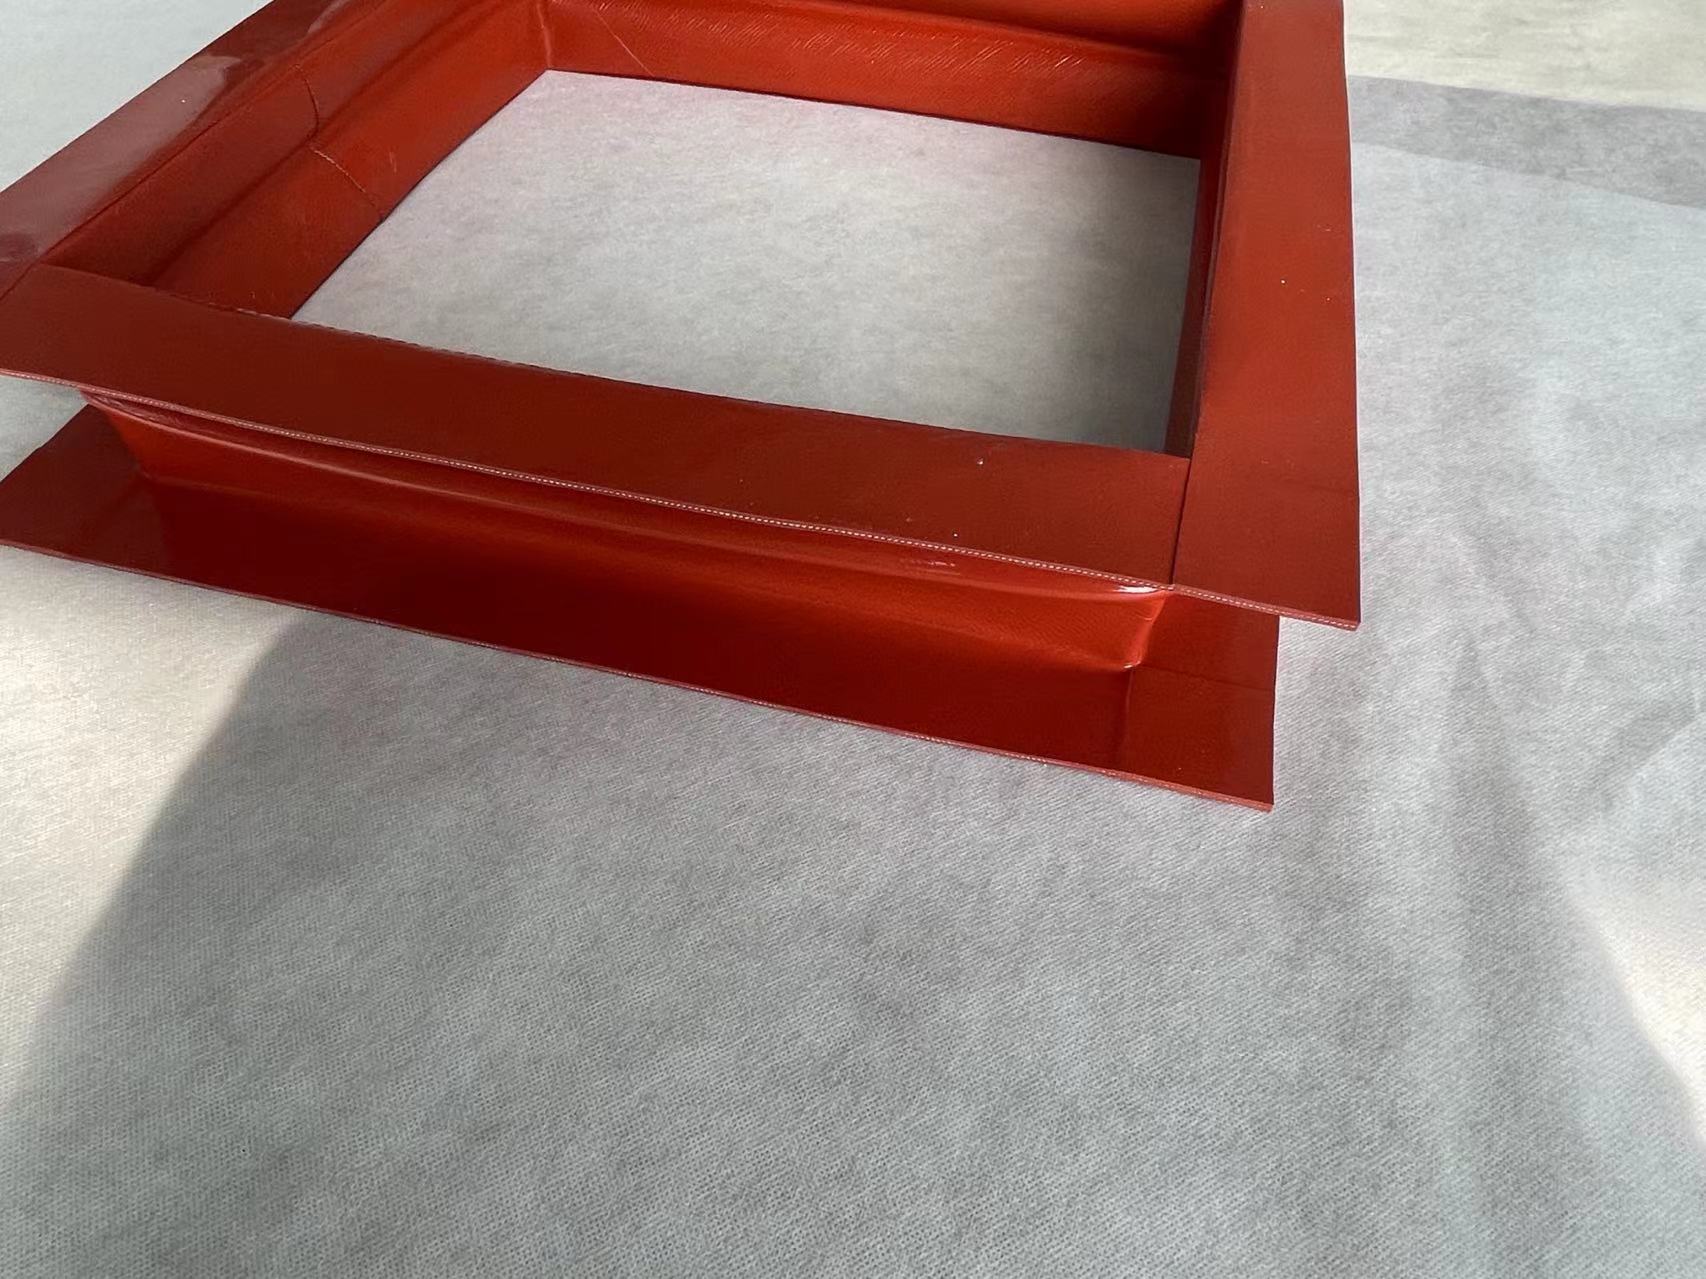 What are the characteristics of the silicone cloth expansion joint in terms of material?